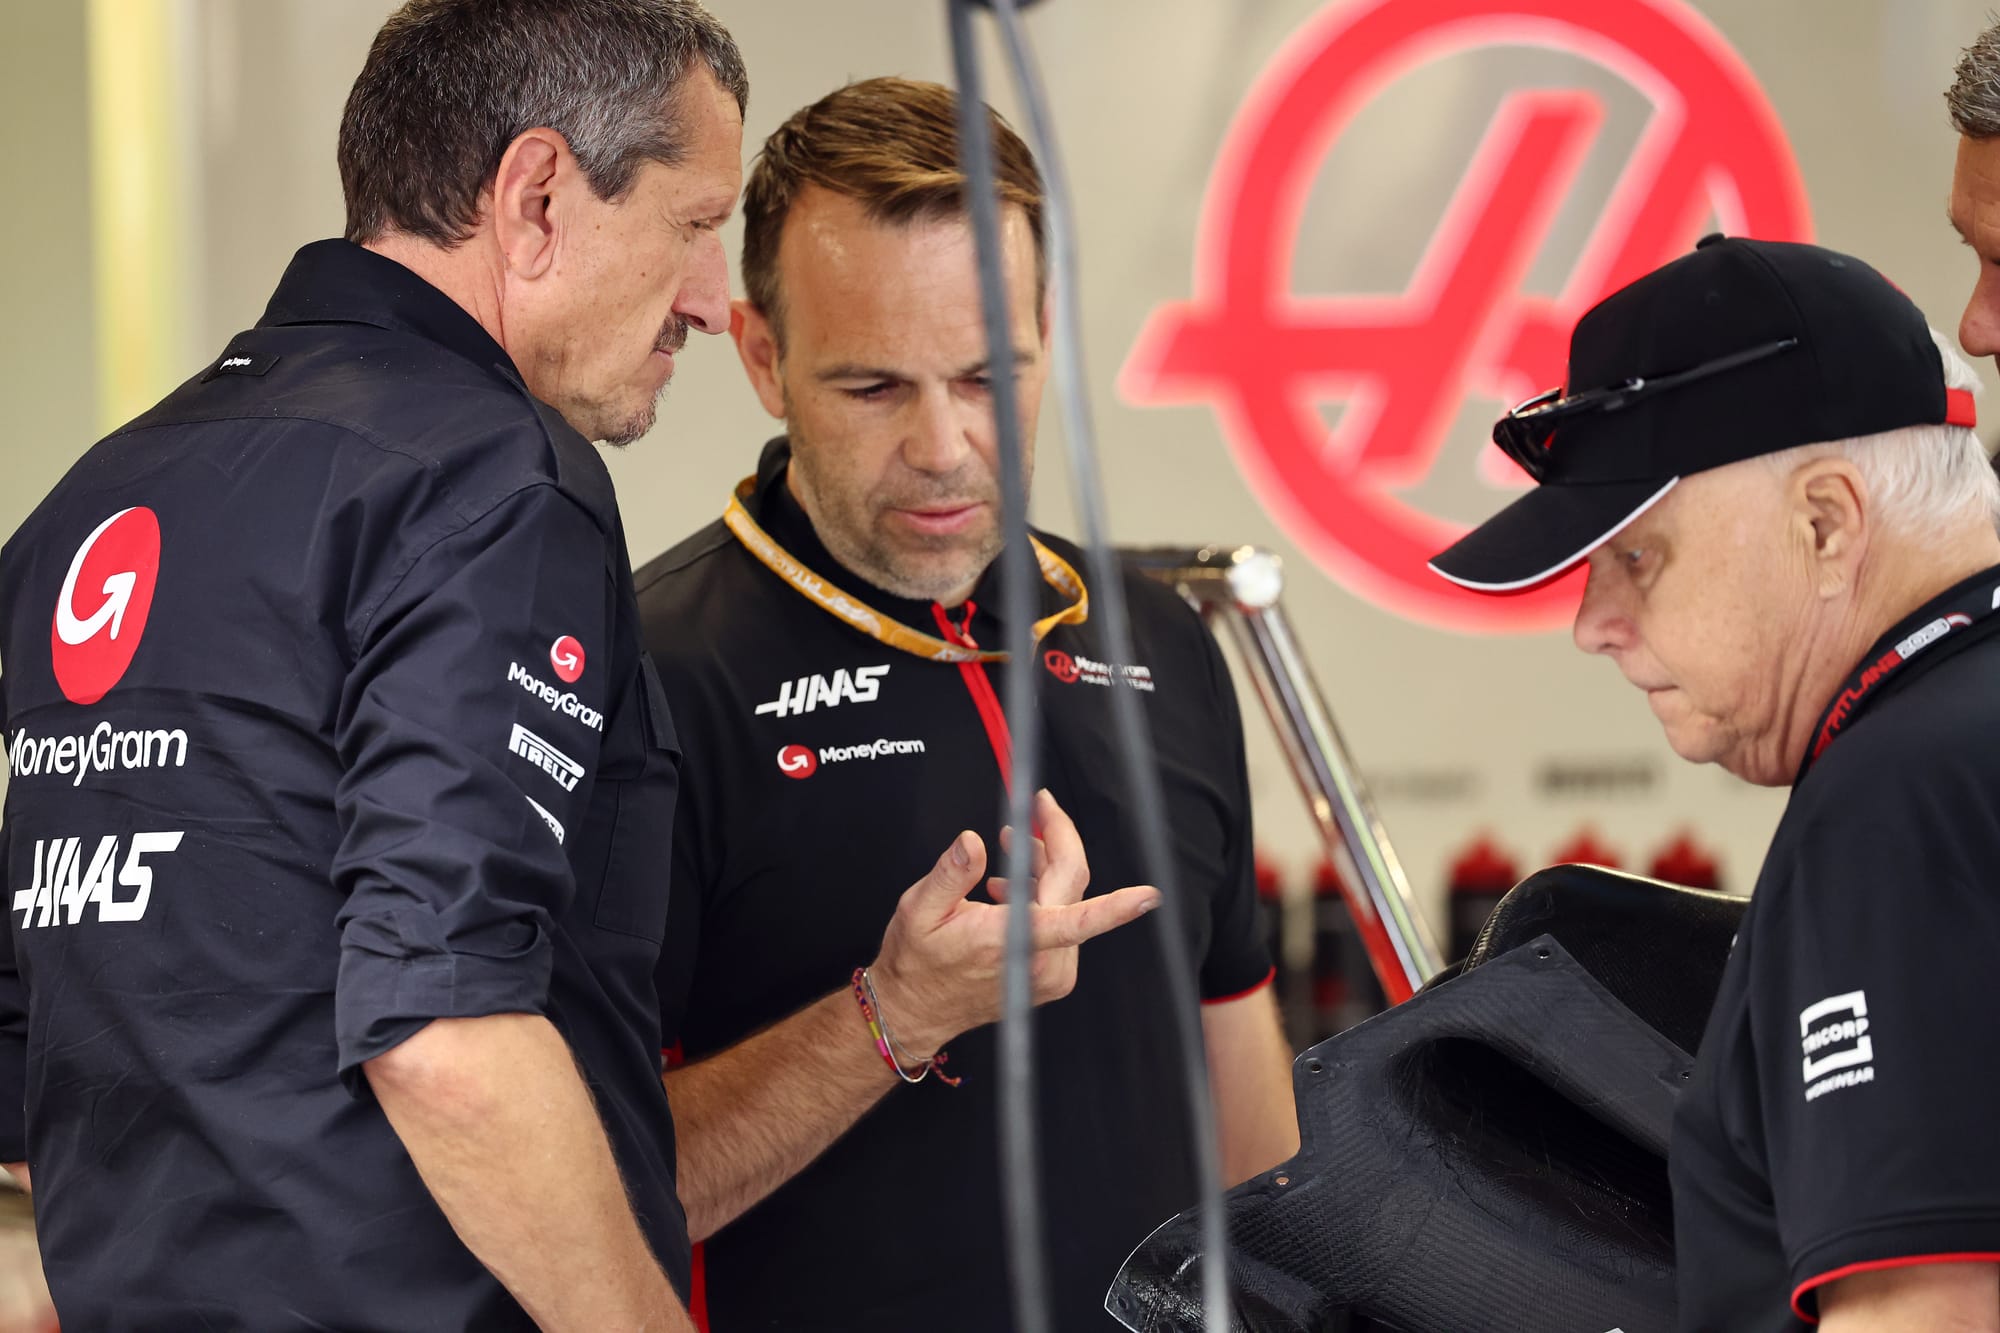 Gene Haas risks wasting a billion-dollar chance for his F1 team